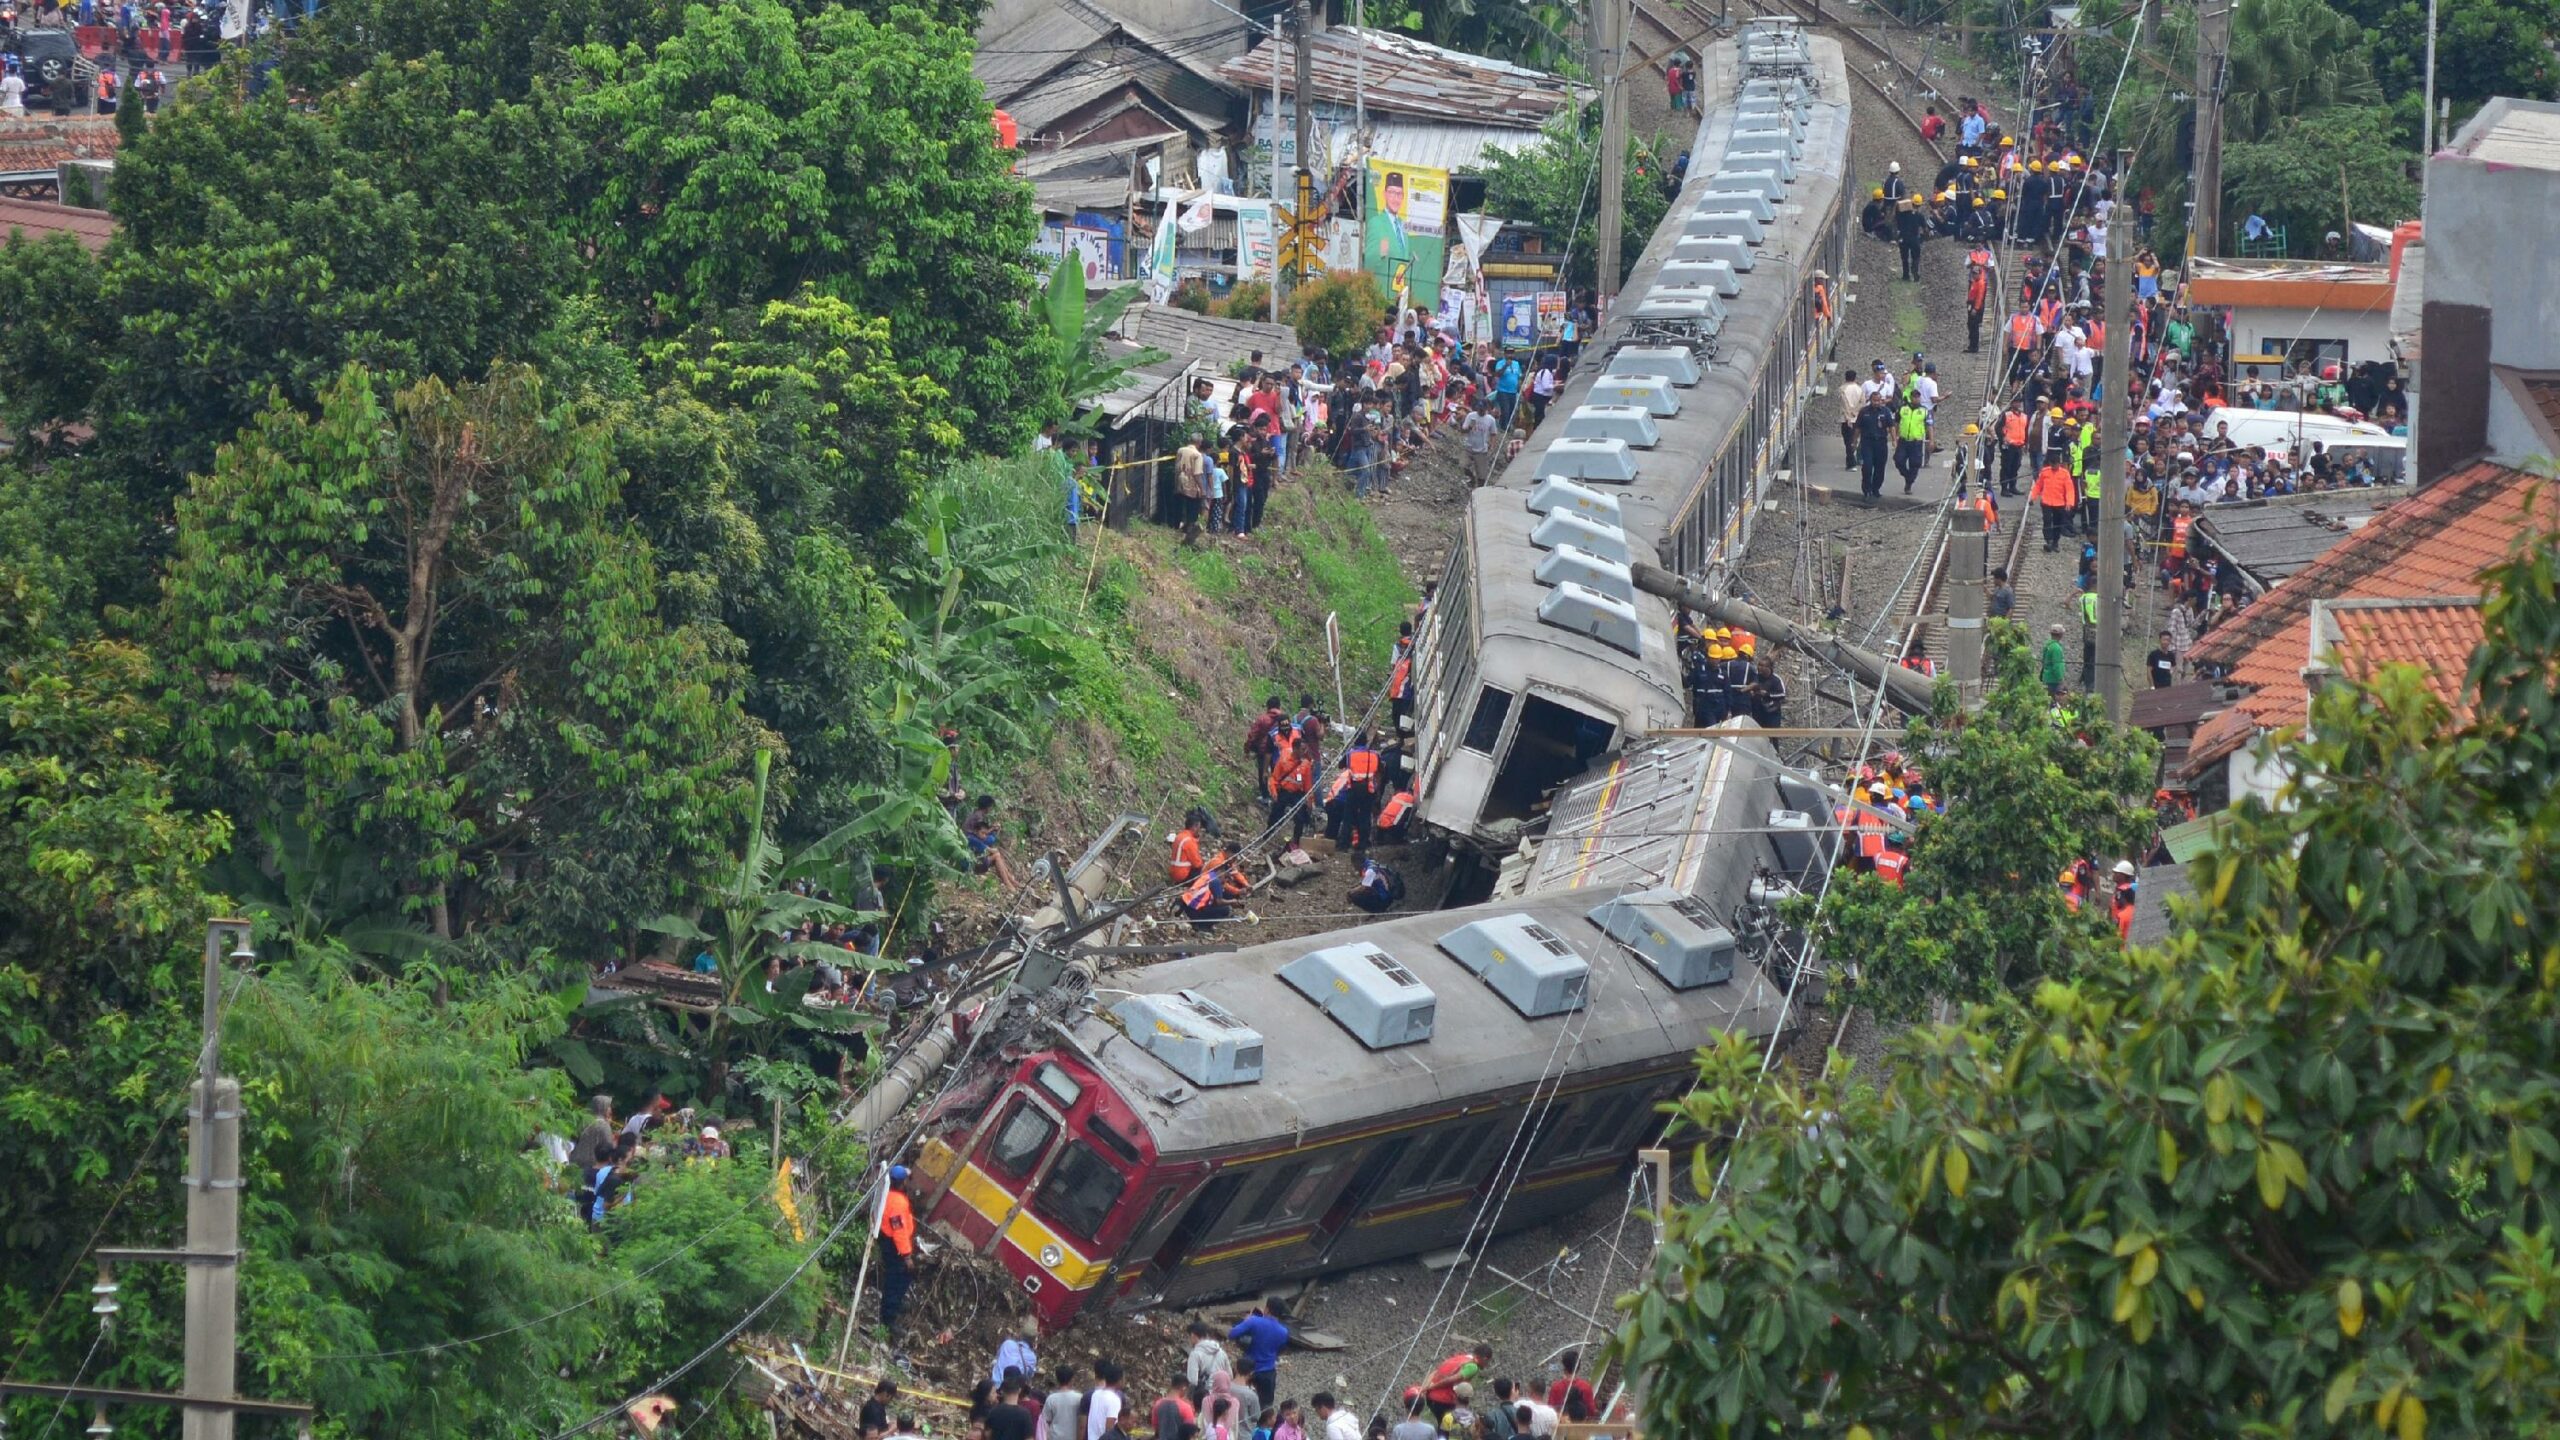 3 killed, more than 10 injured in train accident in Indonesia